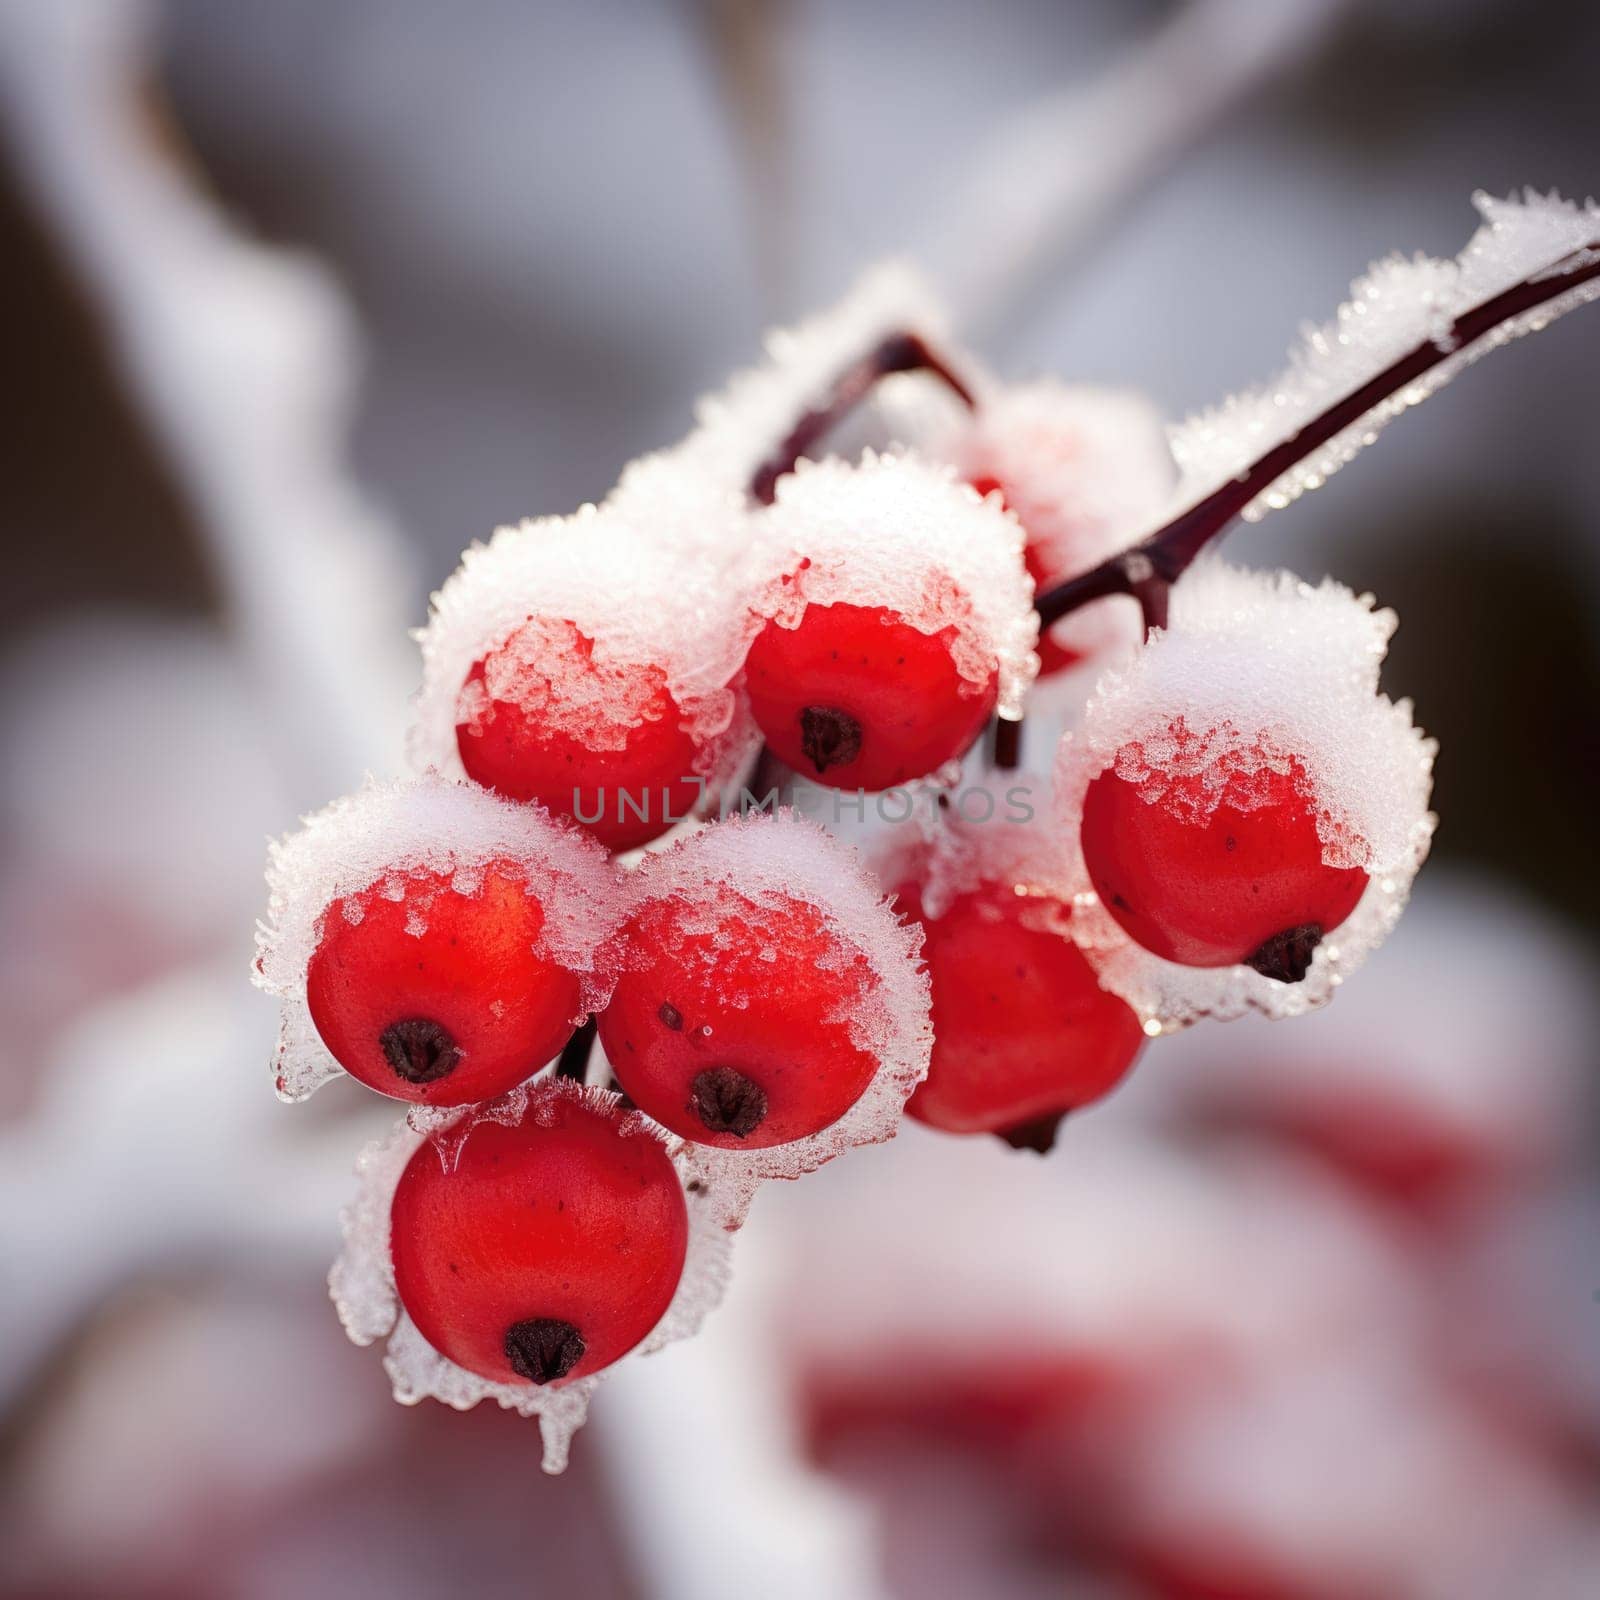 Red berries covered in snow on a branch, AI by starush